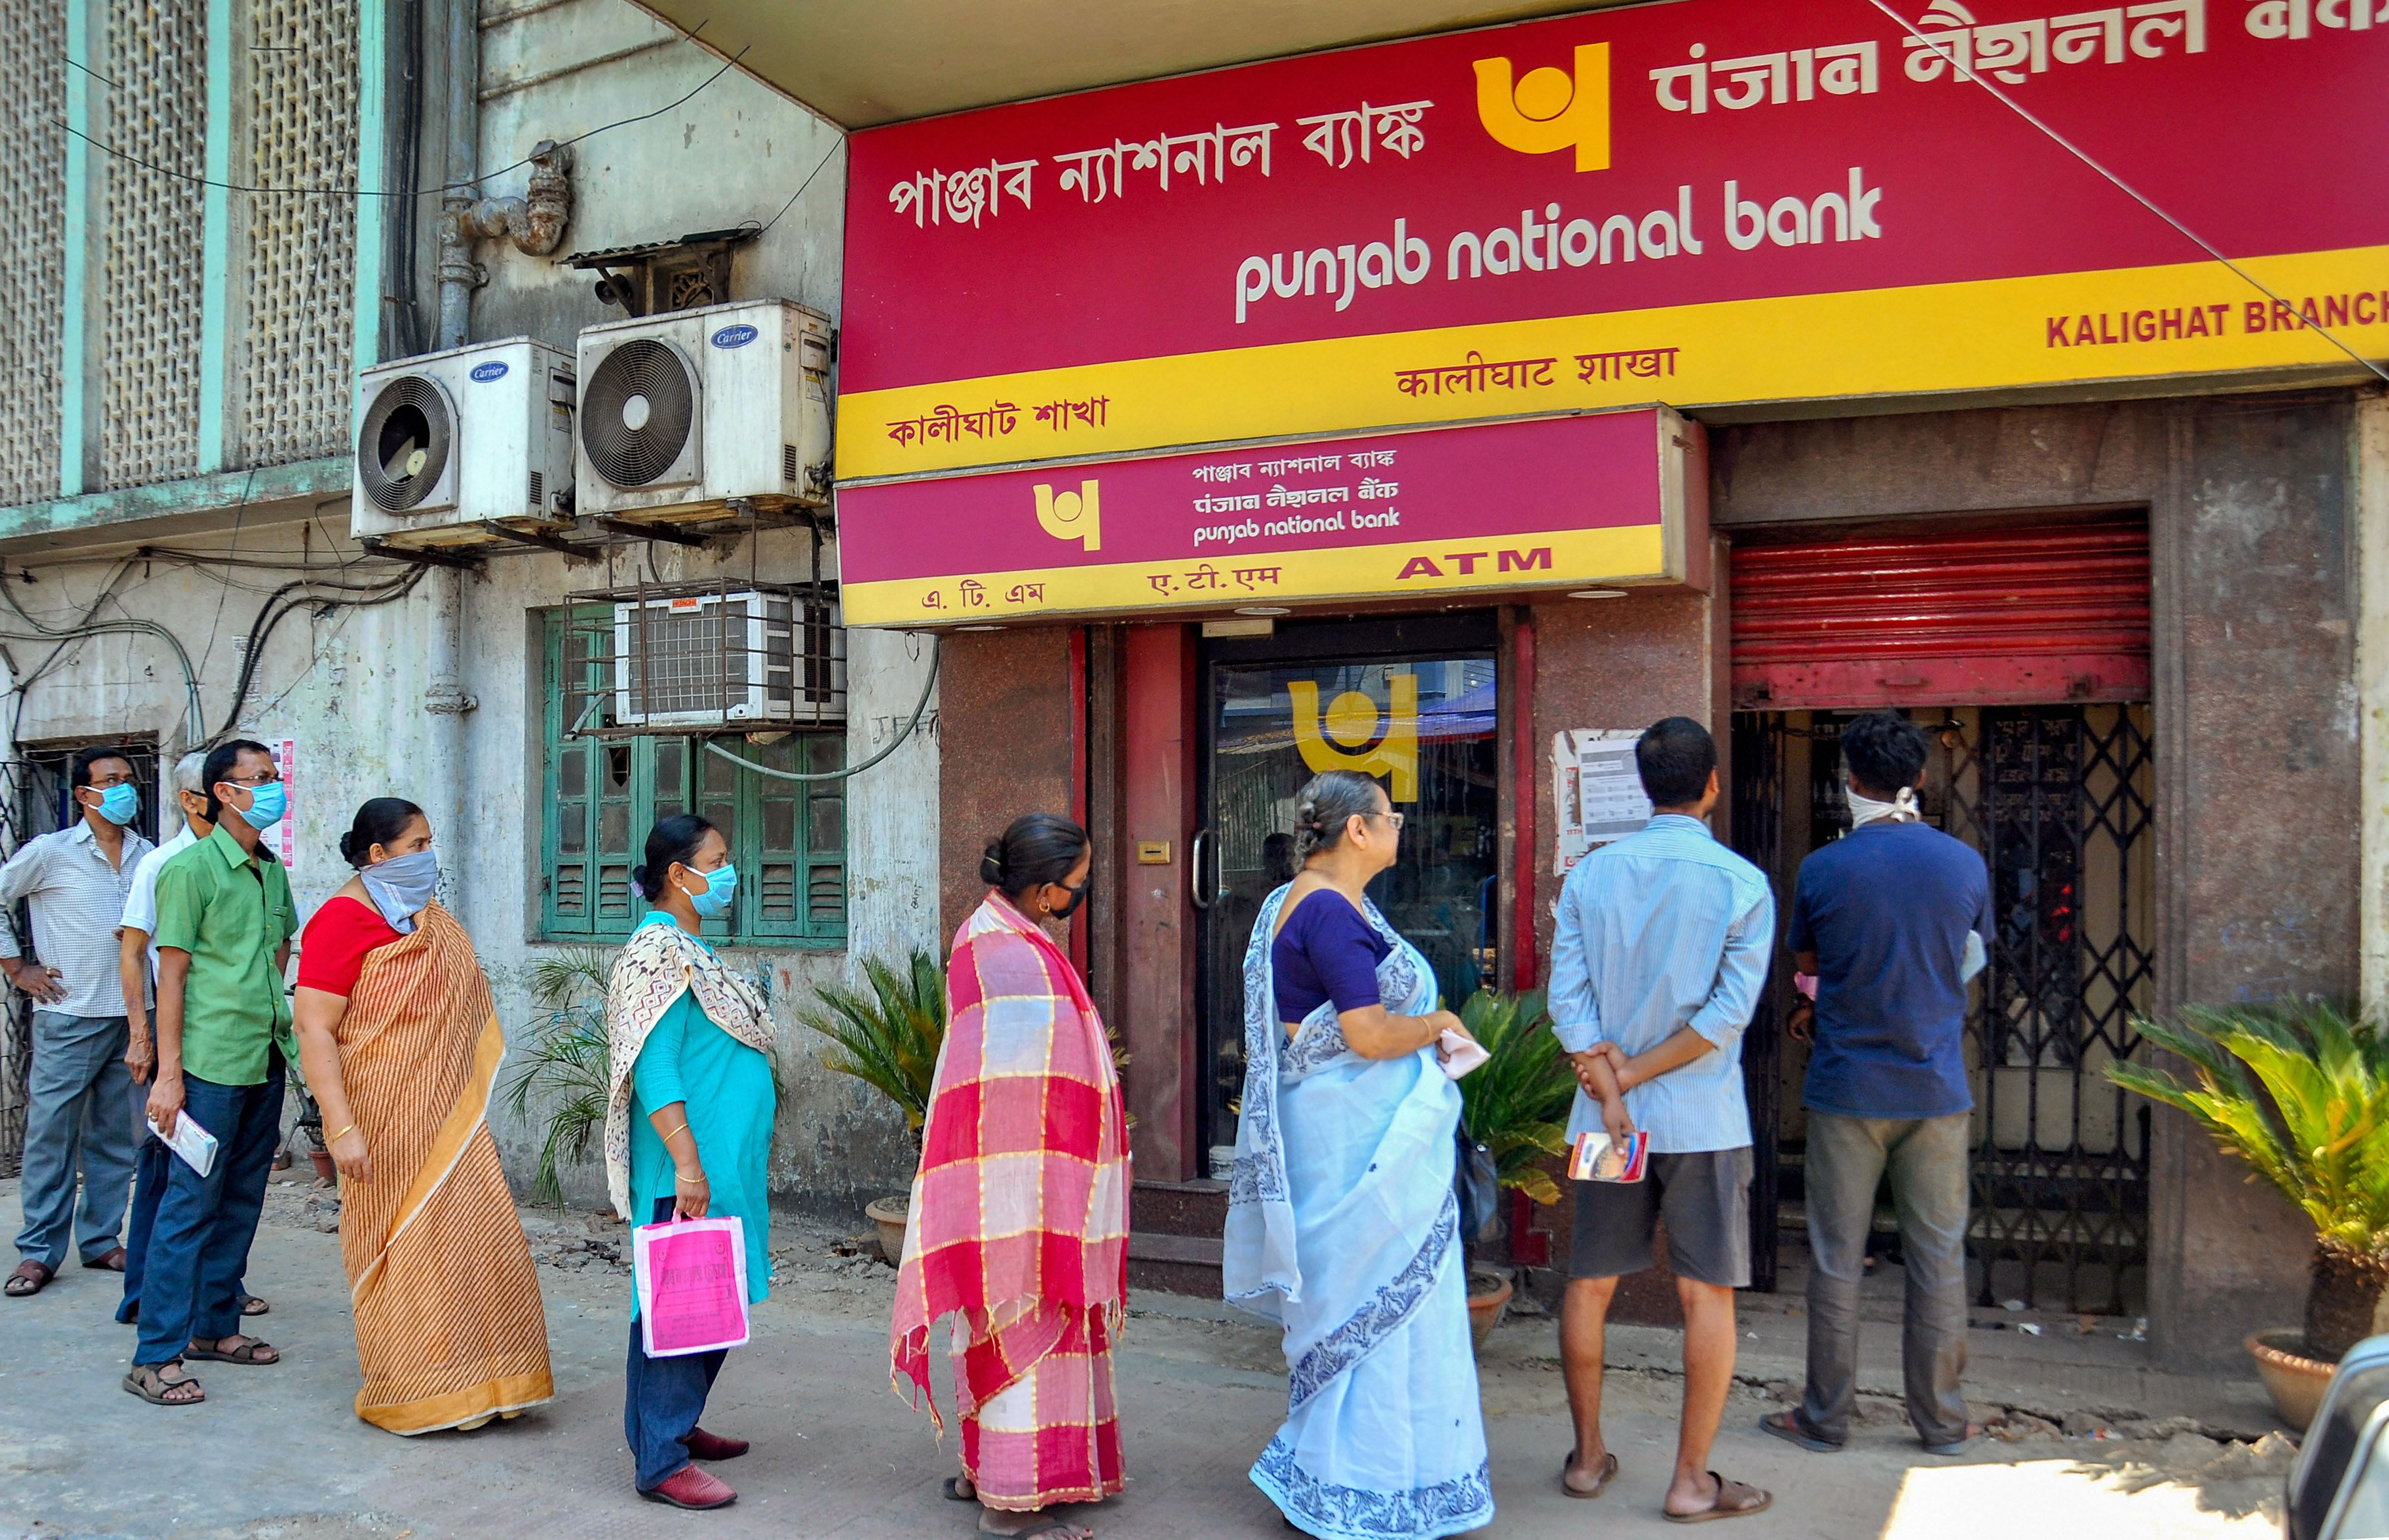 Customers, maintaining social distance, stand outside a bank for their financial transactions during the nationwide lockdown. (Credit: PTI Photo)